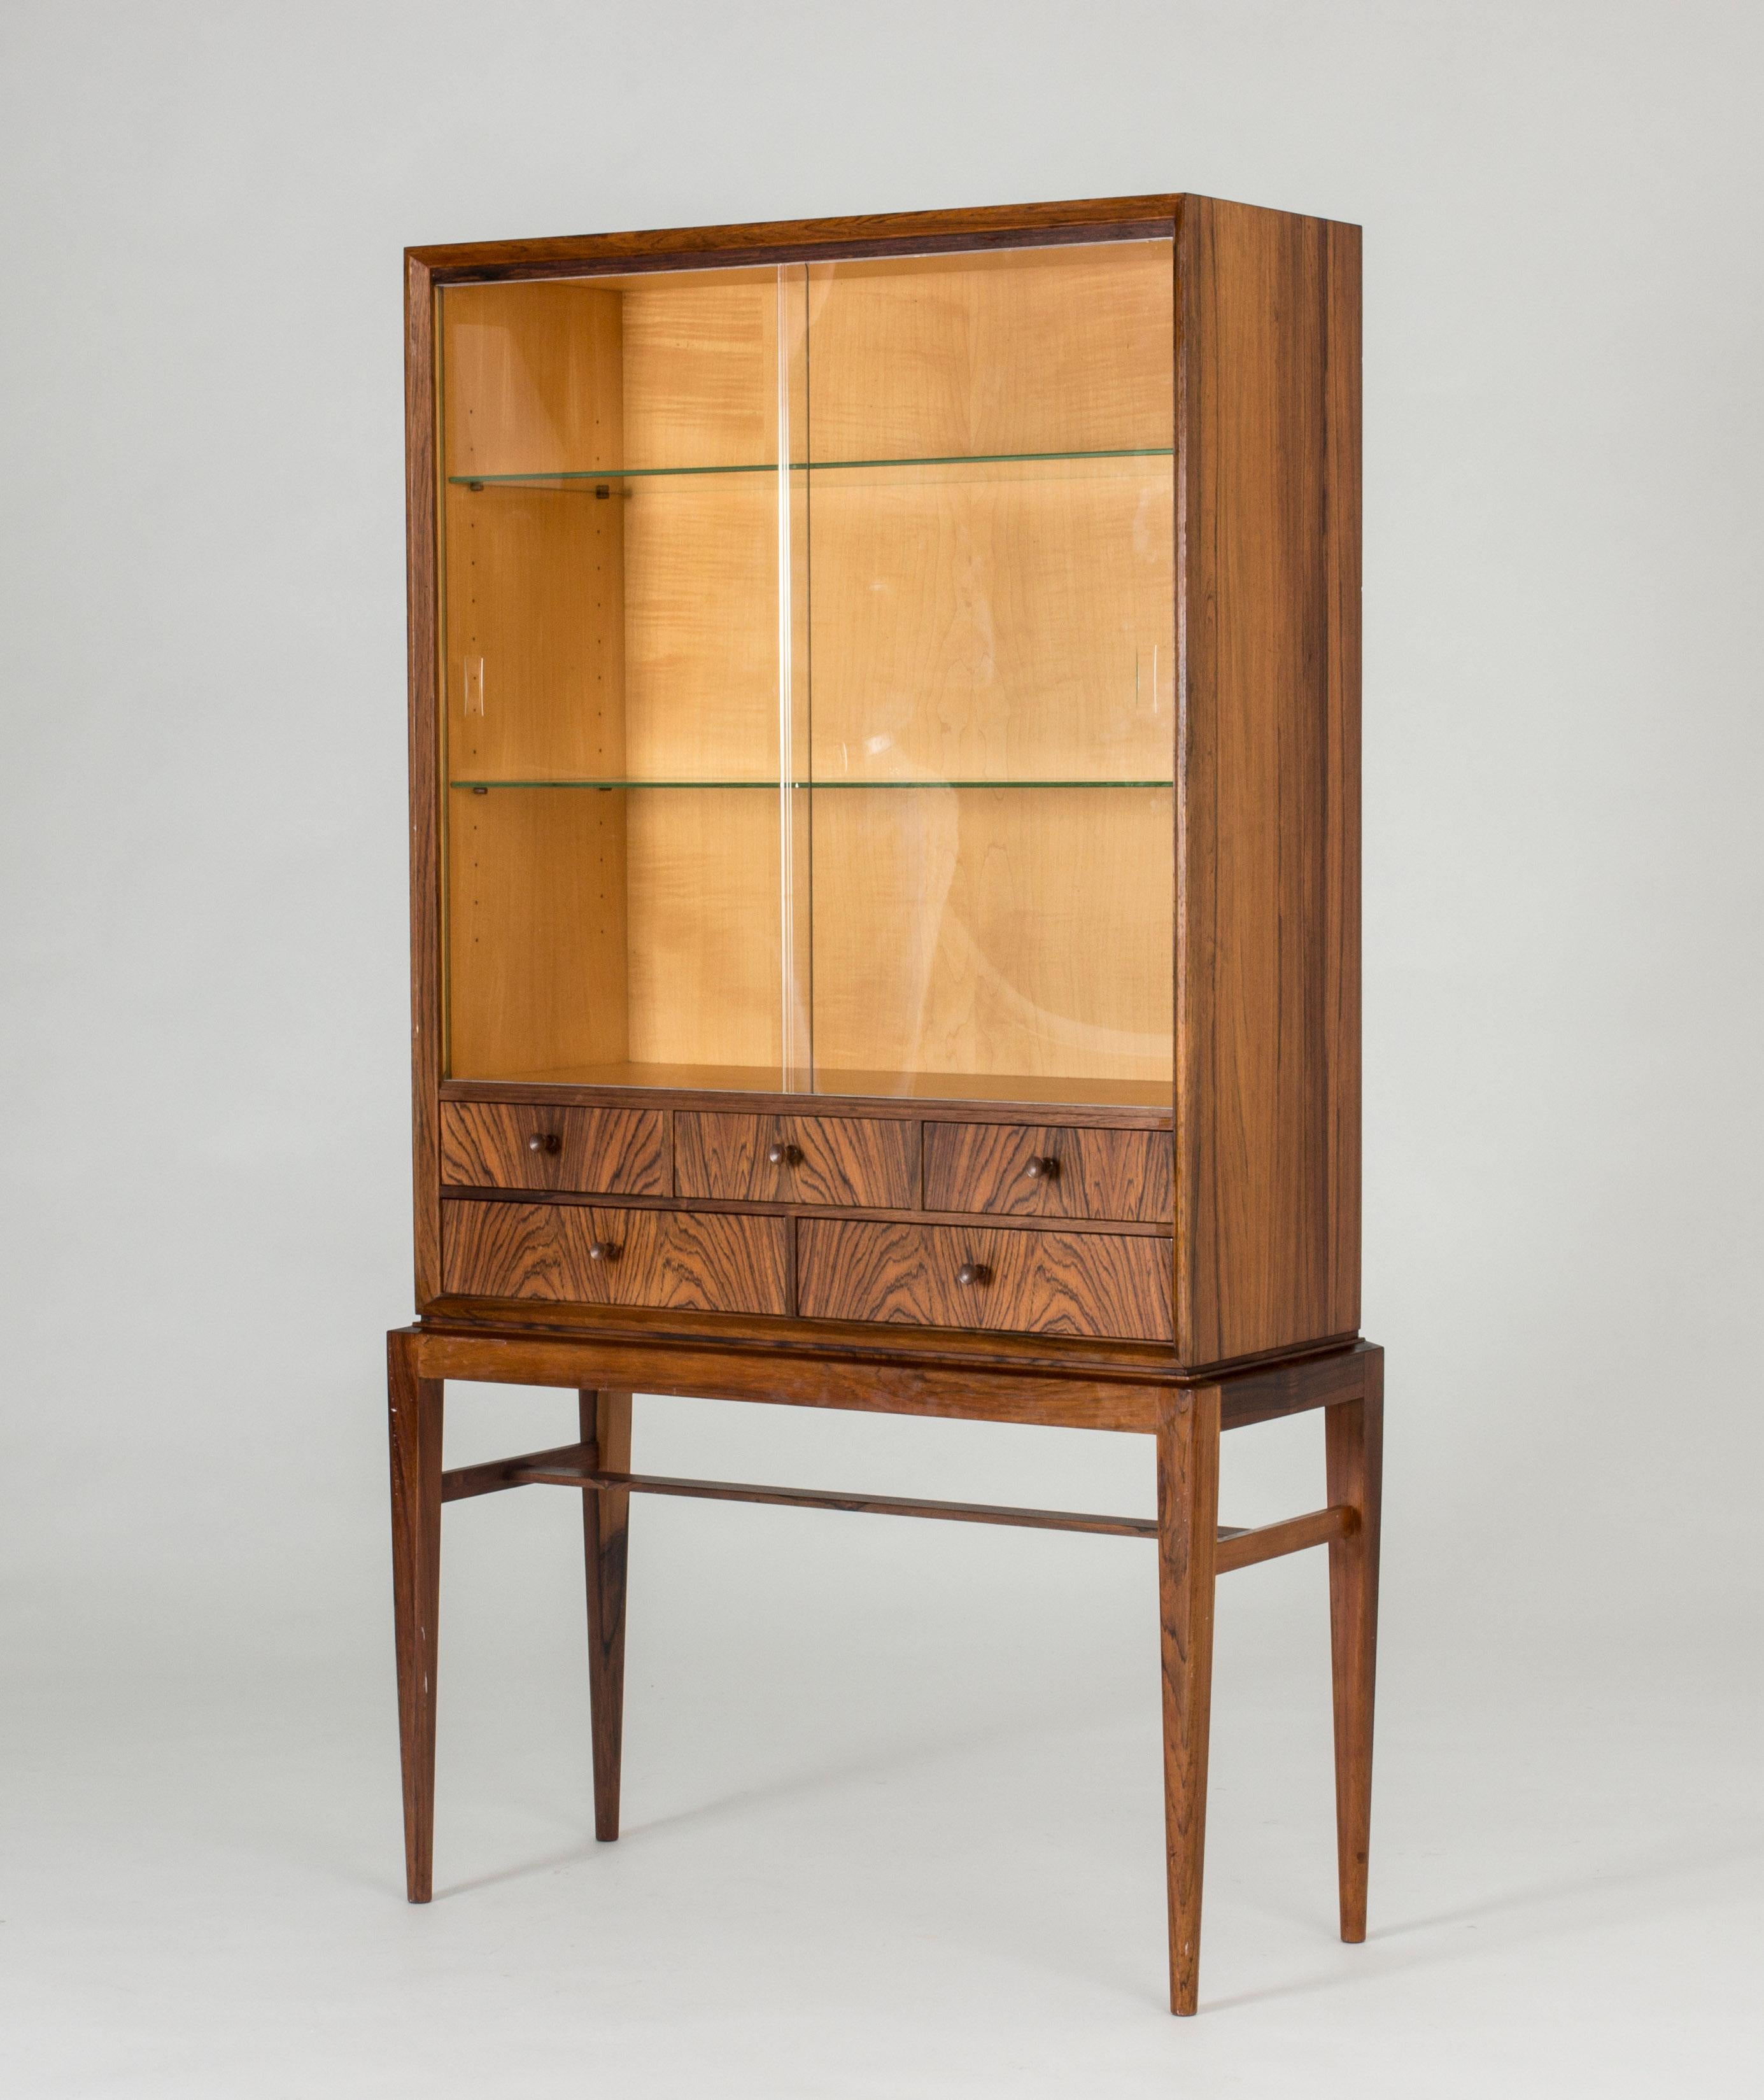 Elegant rosewood cabinet with vitrine doors and glass shelves by Svante Skogh. Small drawers with beautiful woodgrain. Slender legs give the cabinet a light expression.